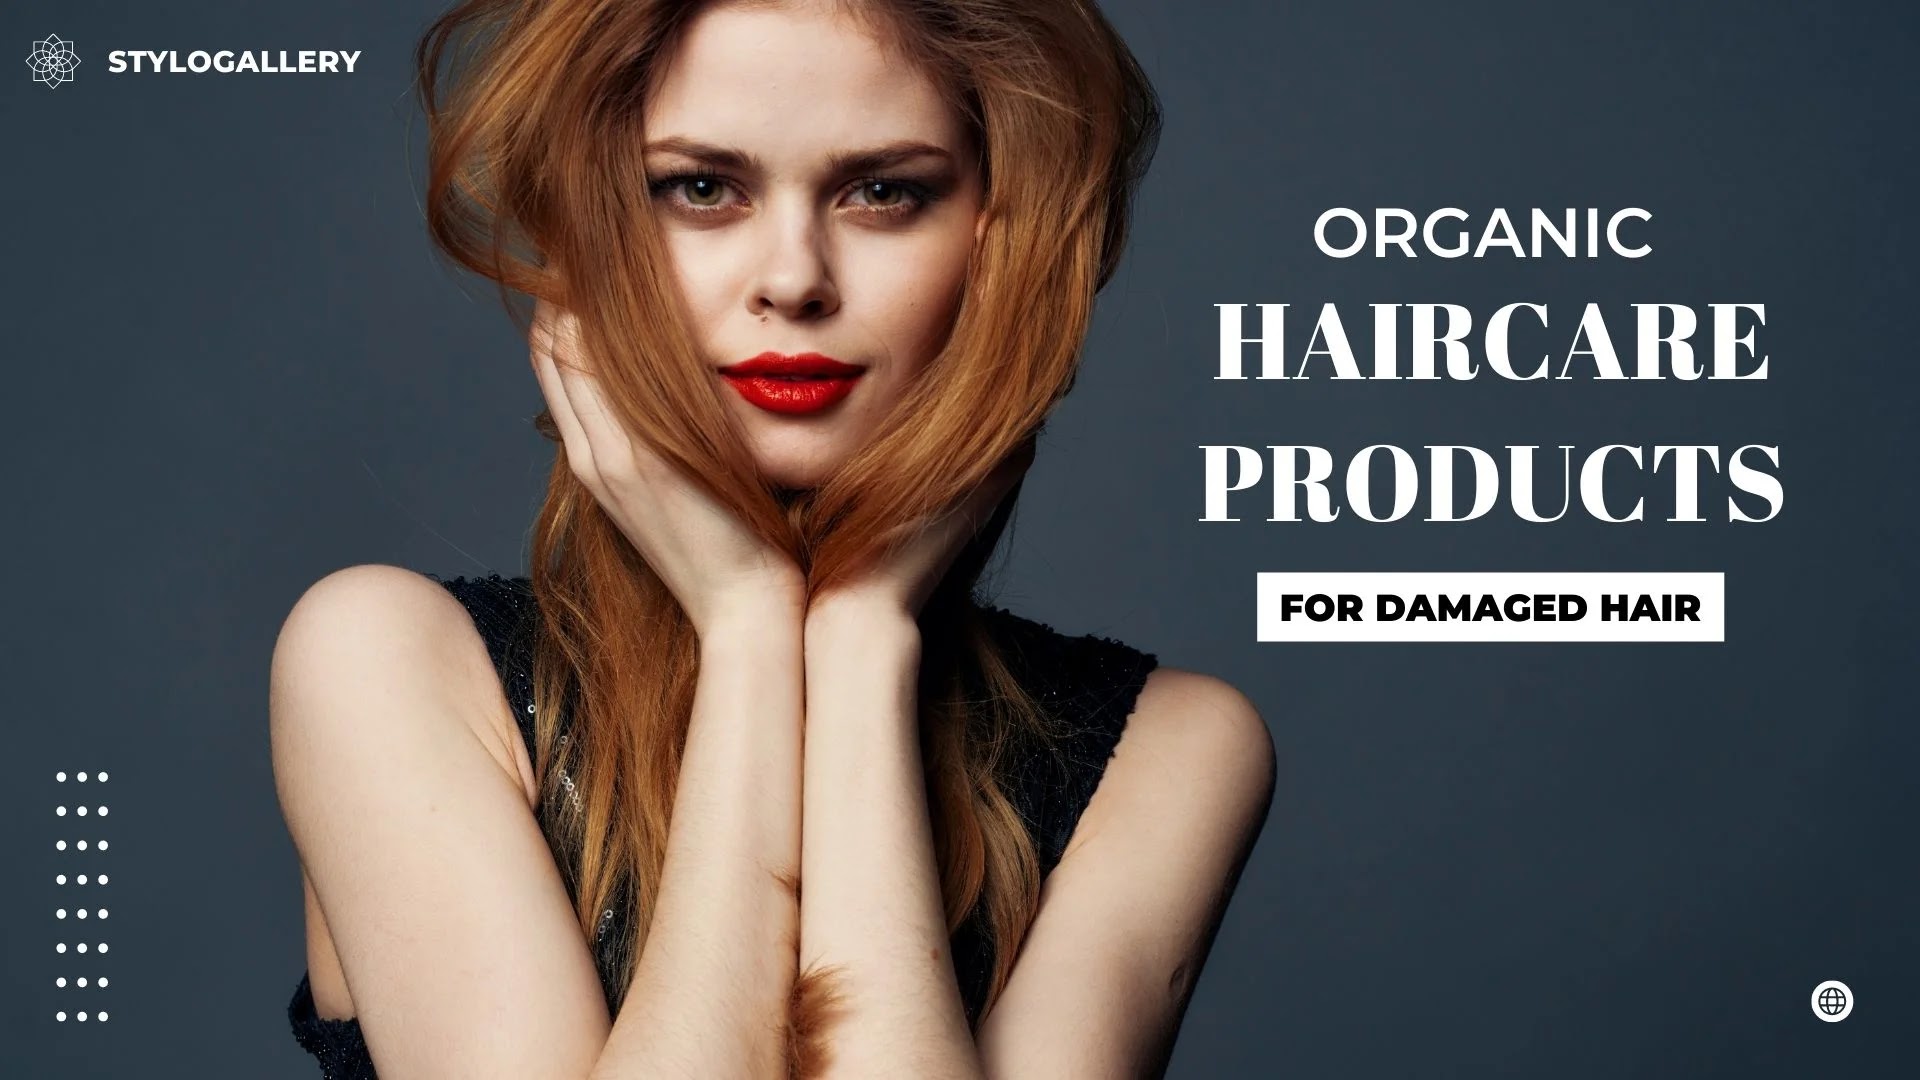 Organic Hair care Products for Damaged Hair